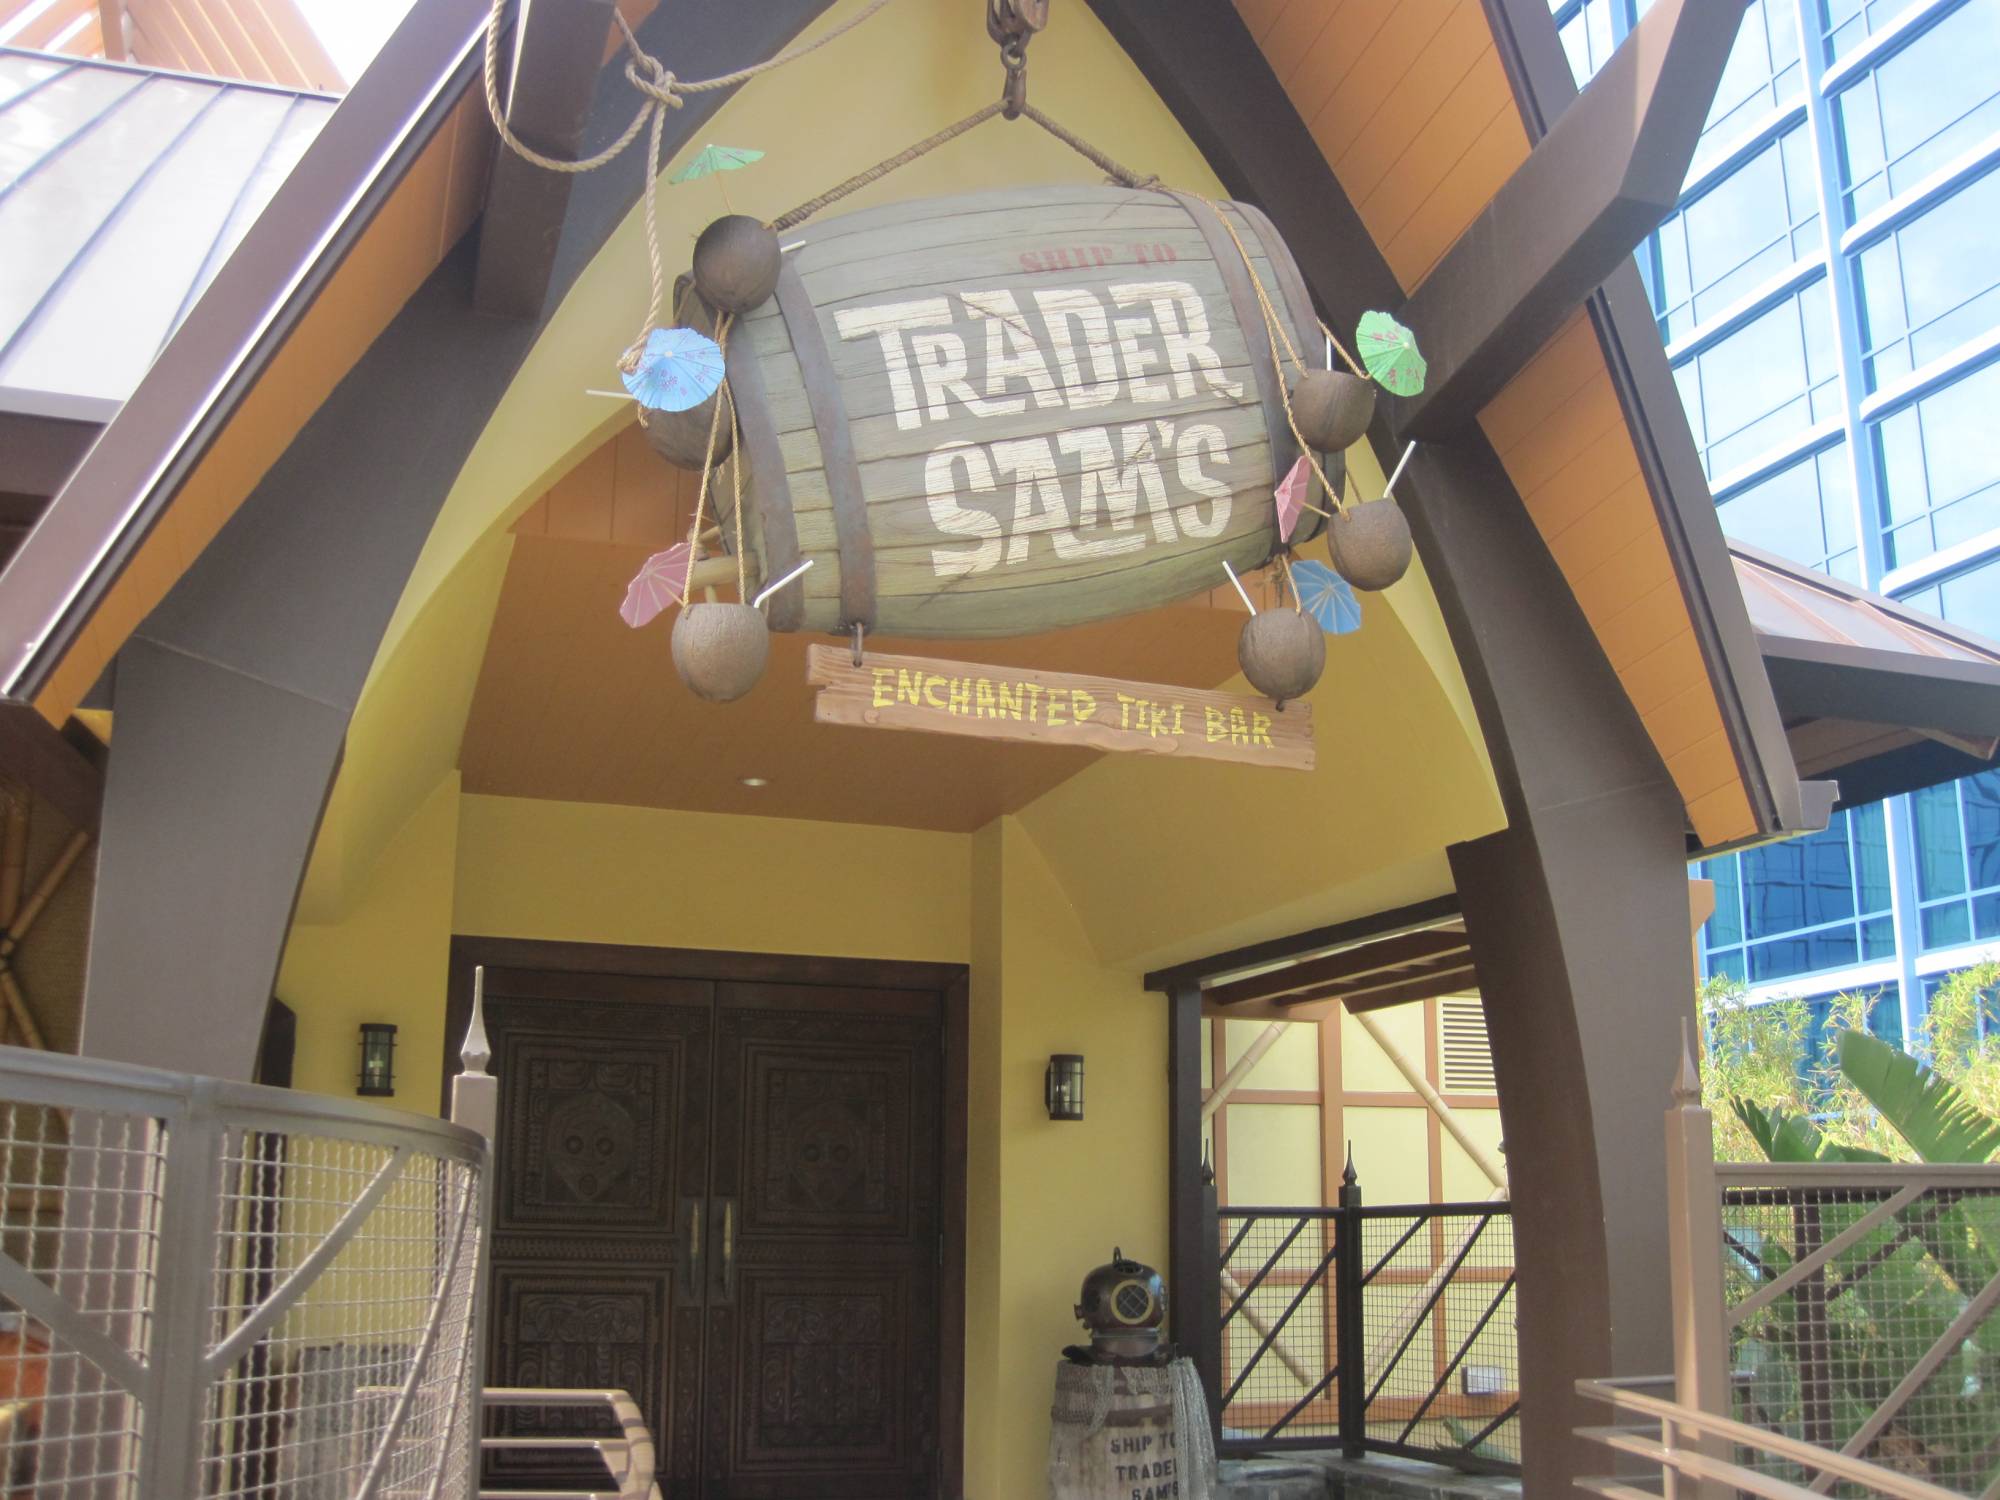 Sit back and relax at Trader Sam's at the Disneyland Hotel |PassPorter.com